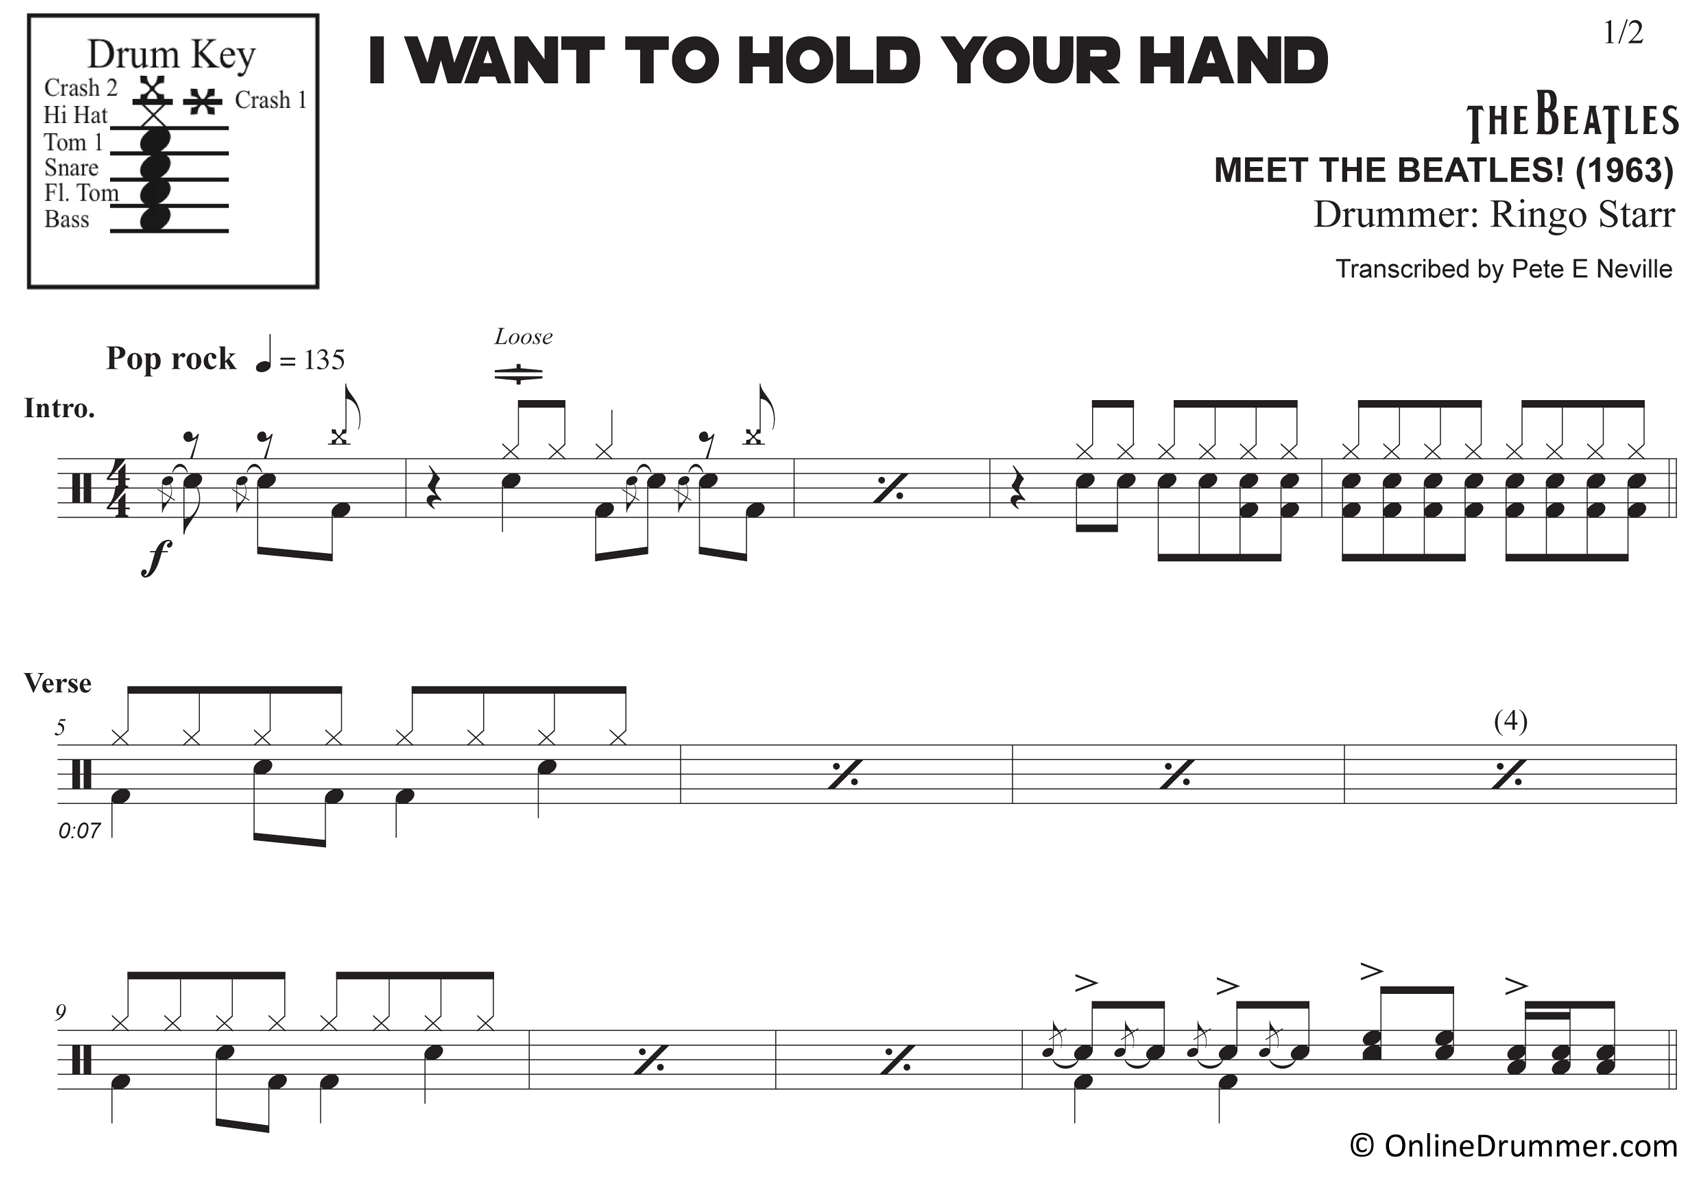 I Want to Hold Your Hand - The Beatles - Drum Sheet Music